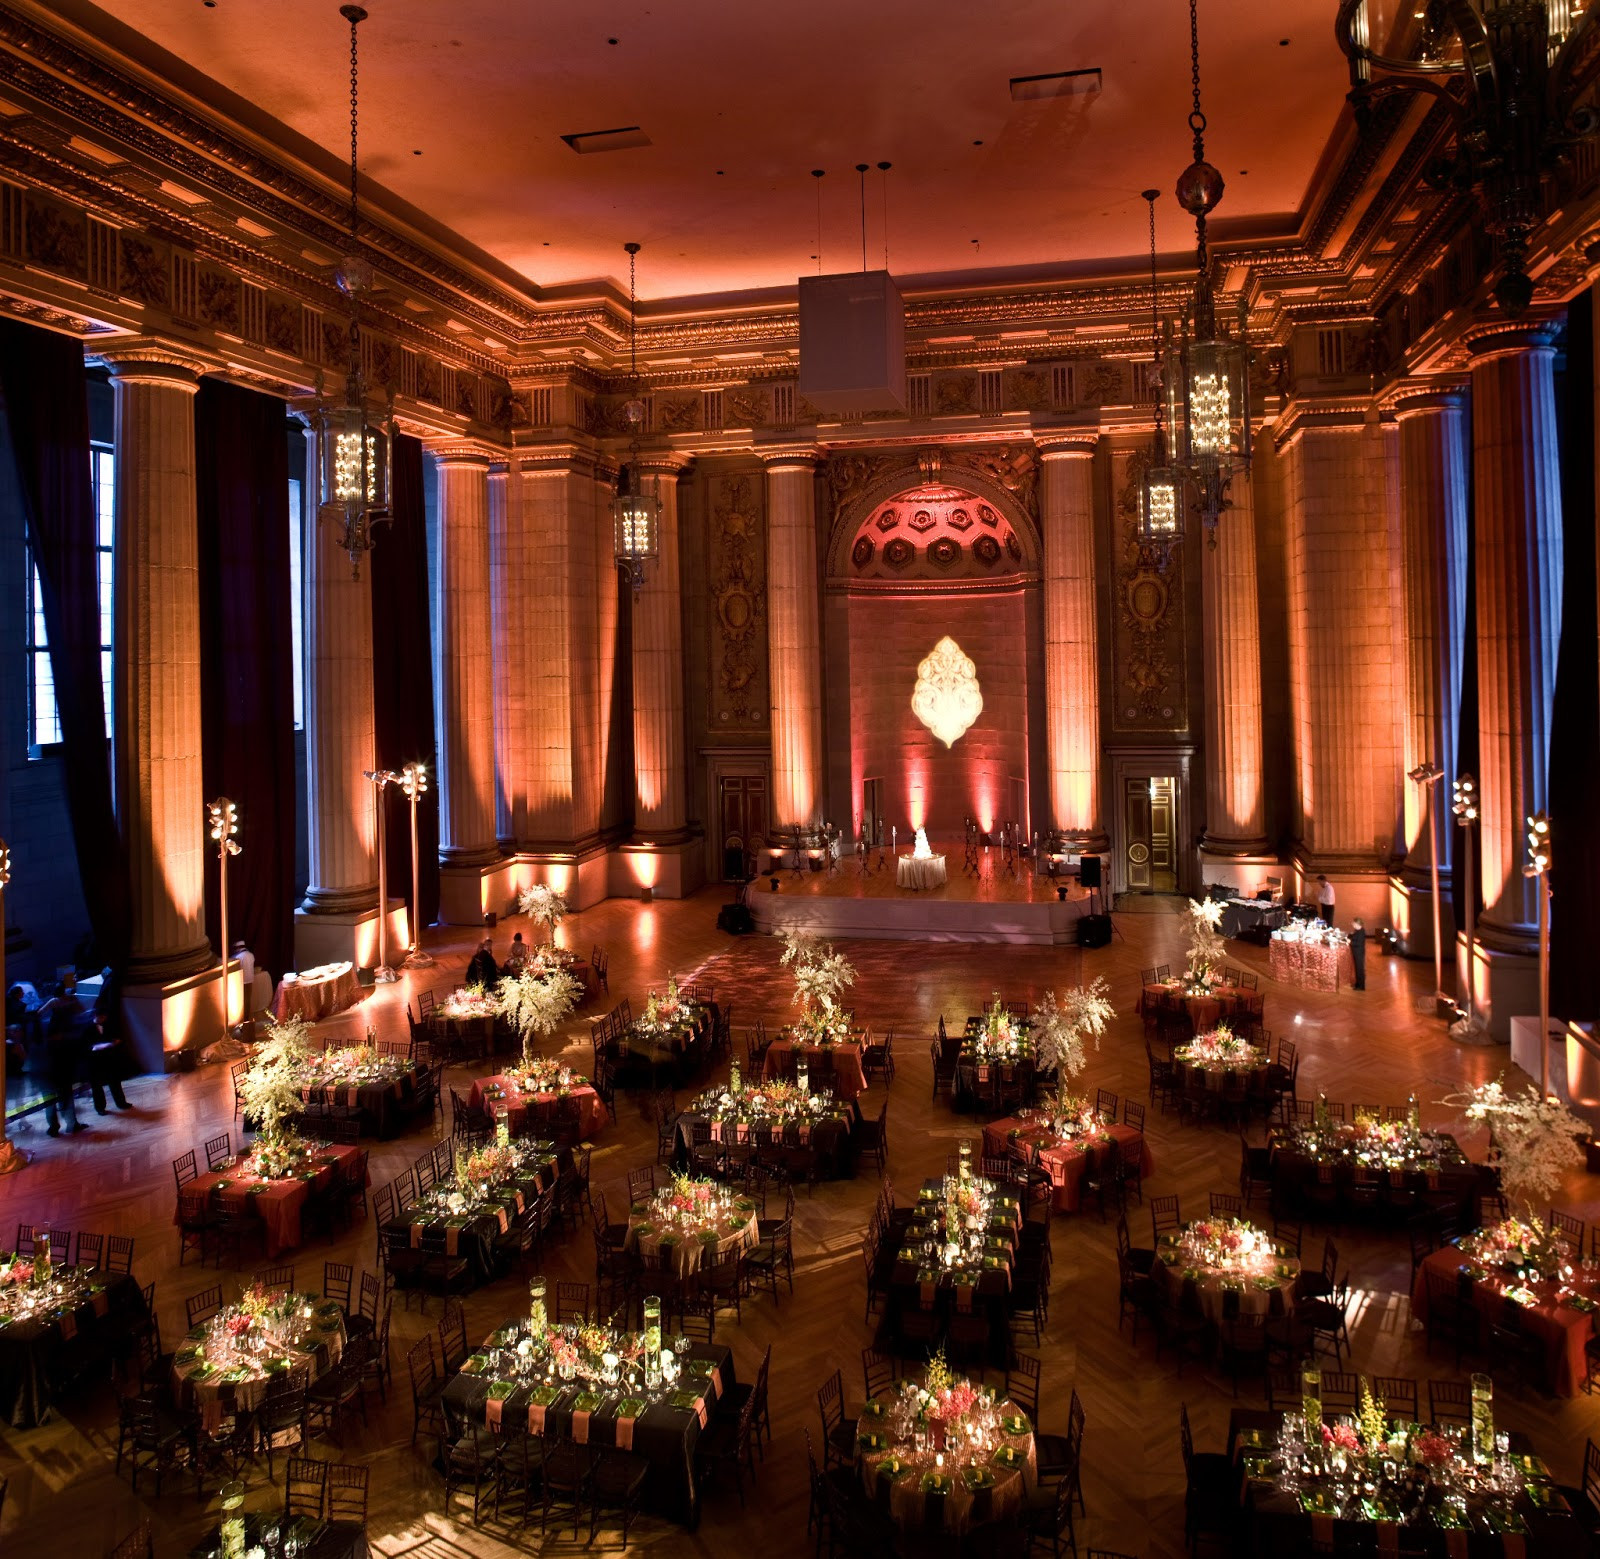 Wedding Venues Dc
 Bridal Bubbly DC Wedding Venues Grand and Glamorous